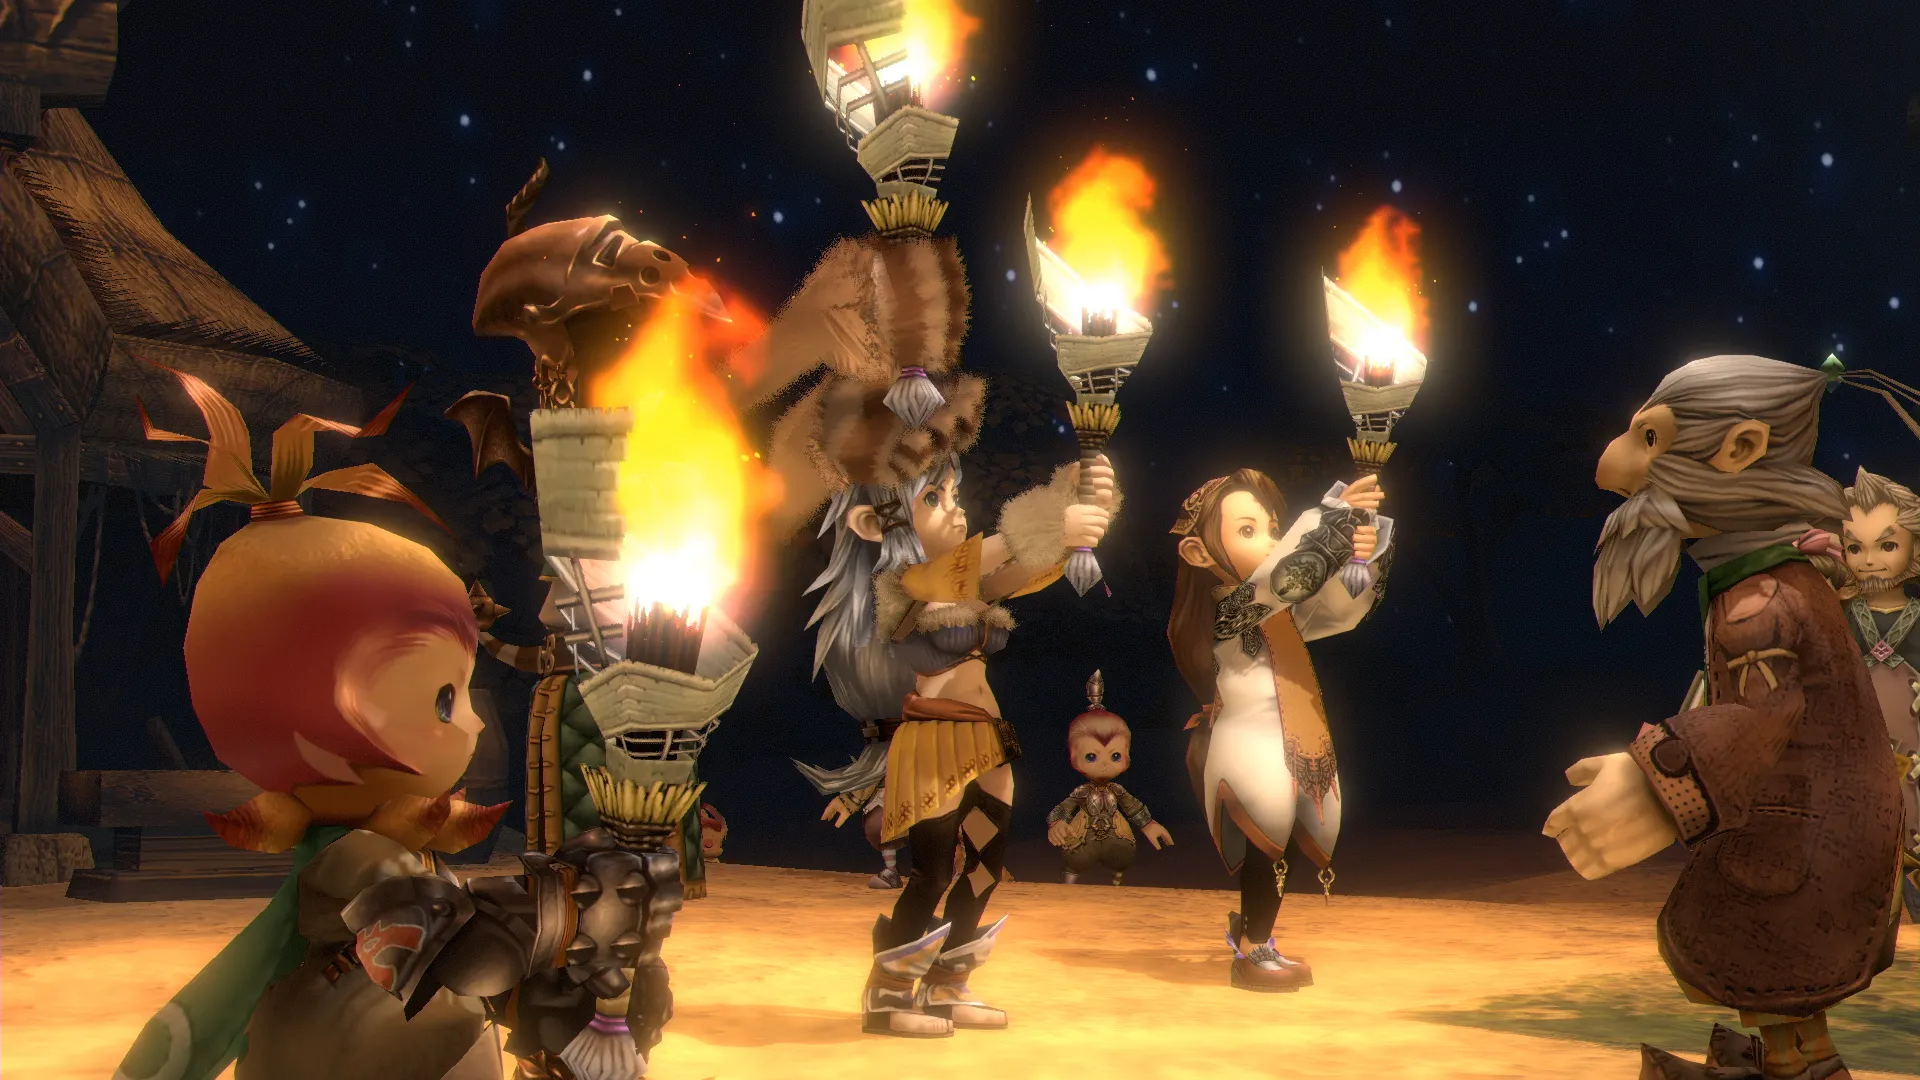  Does Final Fantasy: Crystal Chronicles Remastered support crossplay? 